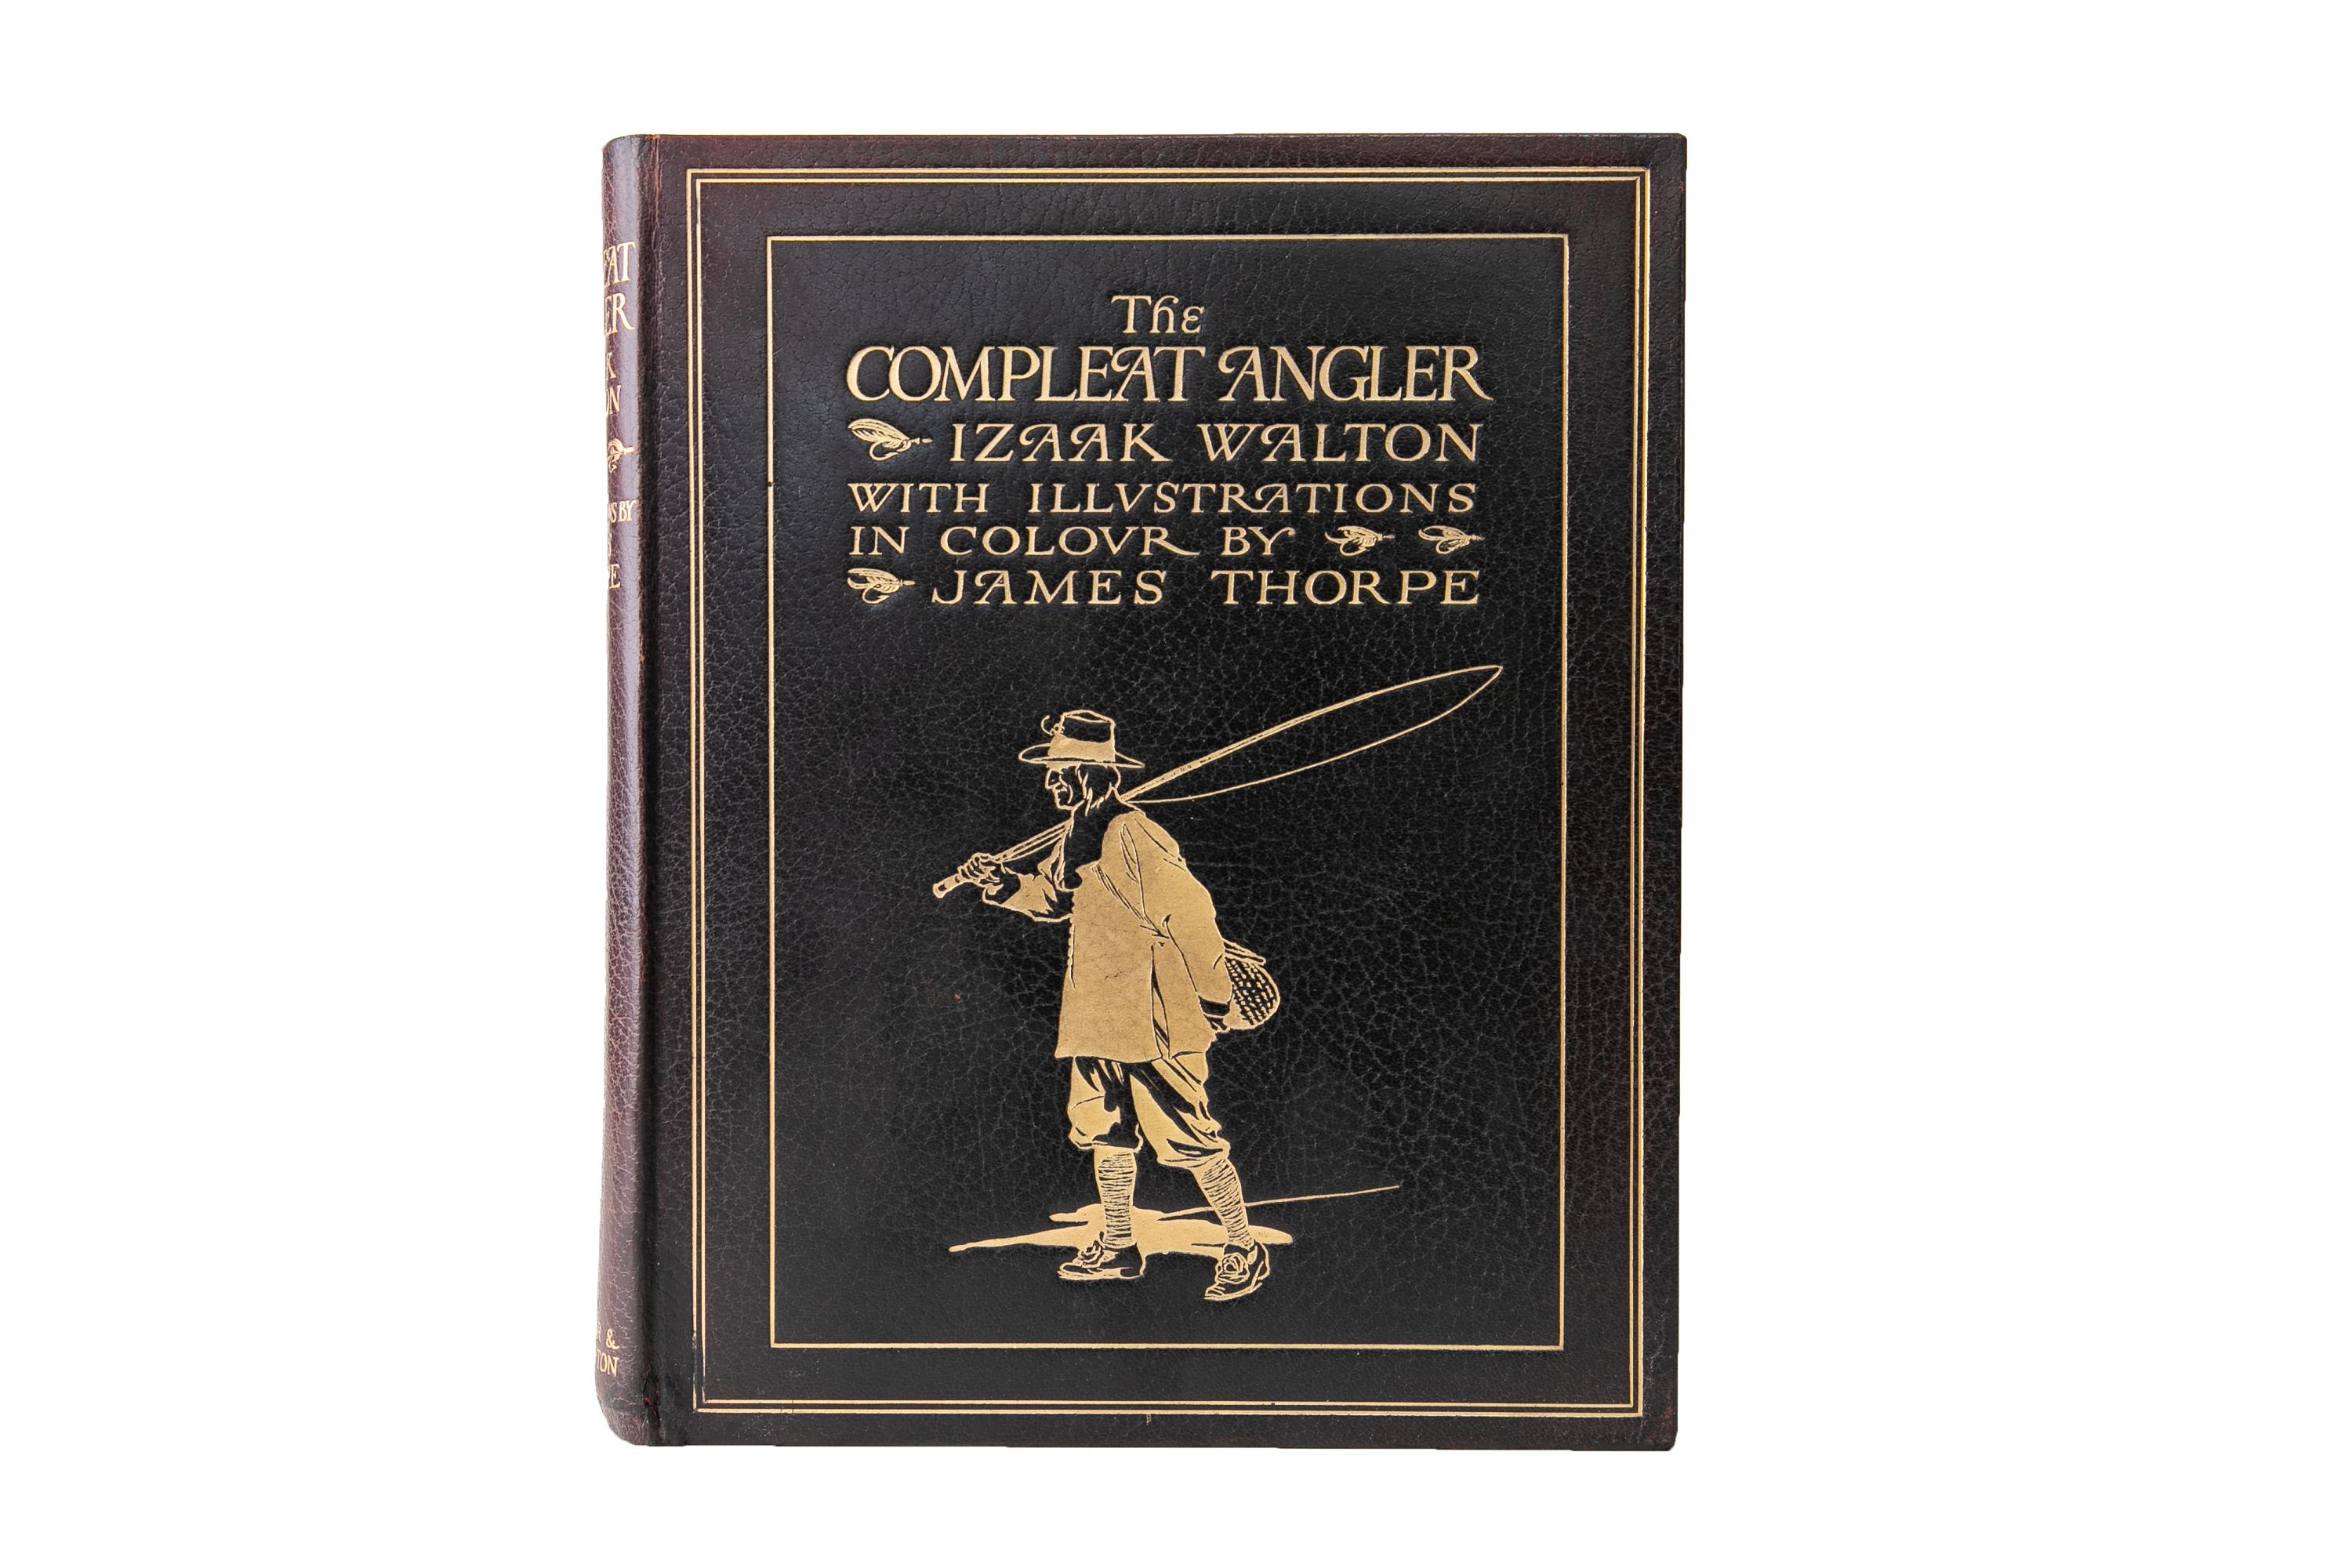 1 Volume. Izaak Walton, The Compleat Angler. Edition de Luxe. Bound in full black morocco with the covers displaying gilt-tooled titular lettering and a depiction of a man going fishing. The spine displays gilt-tooled lettering. Top edge gilt with